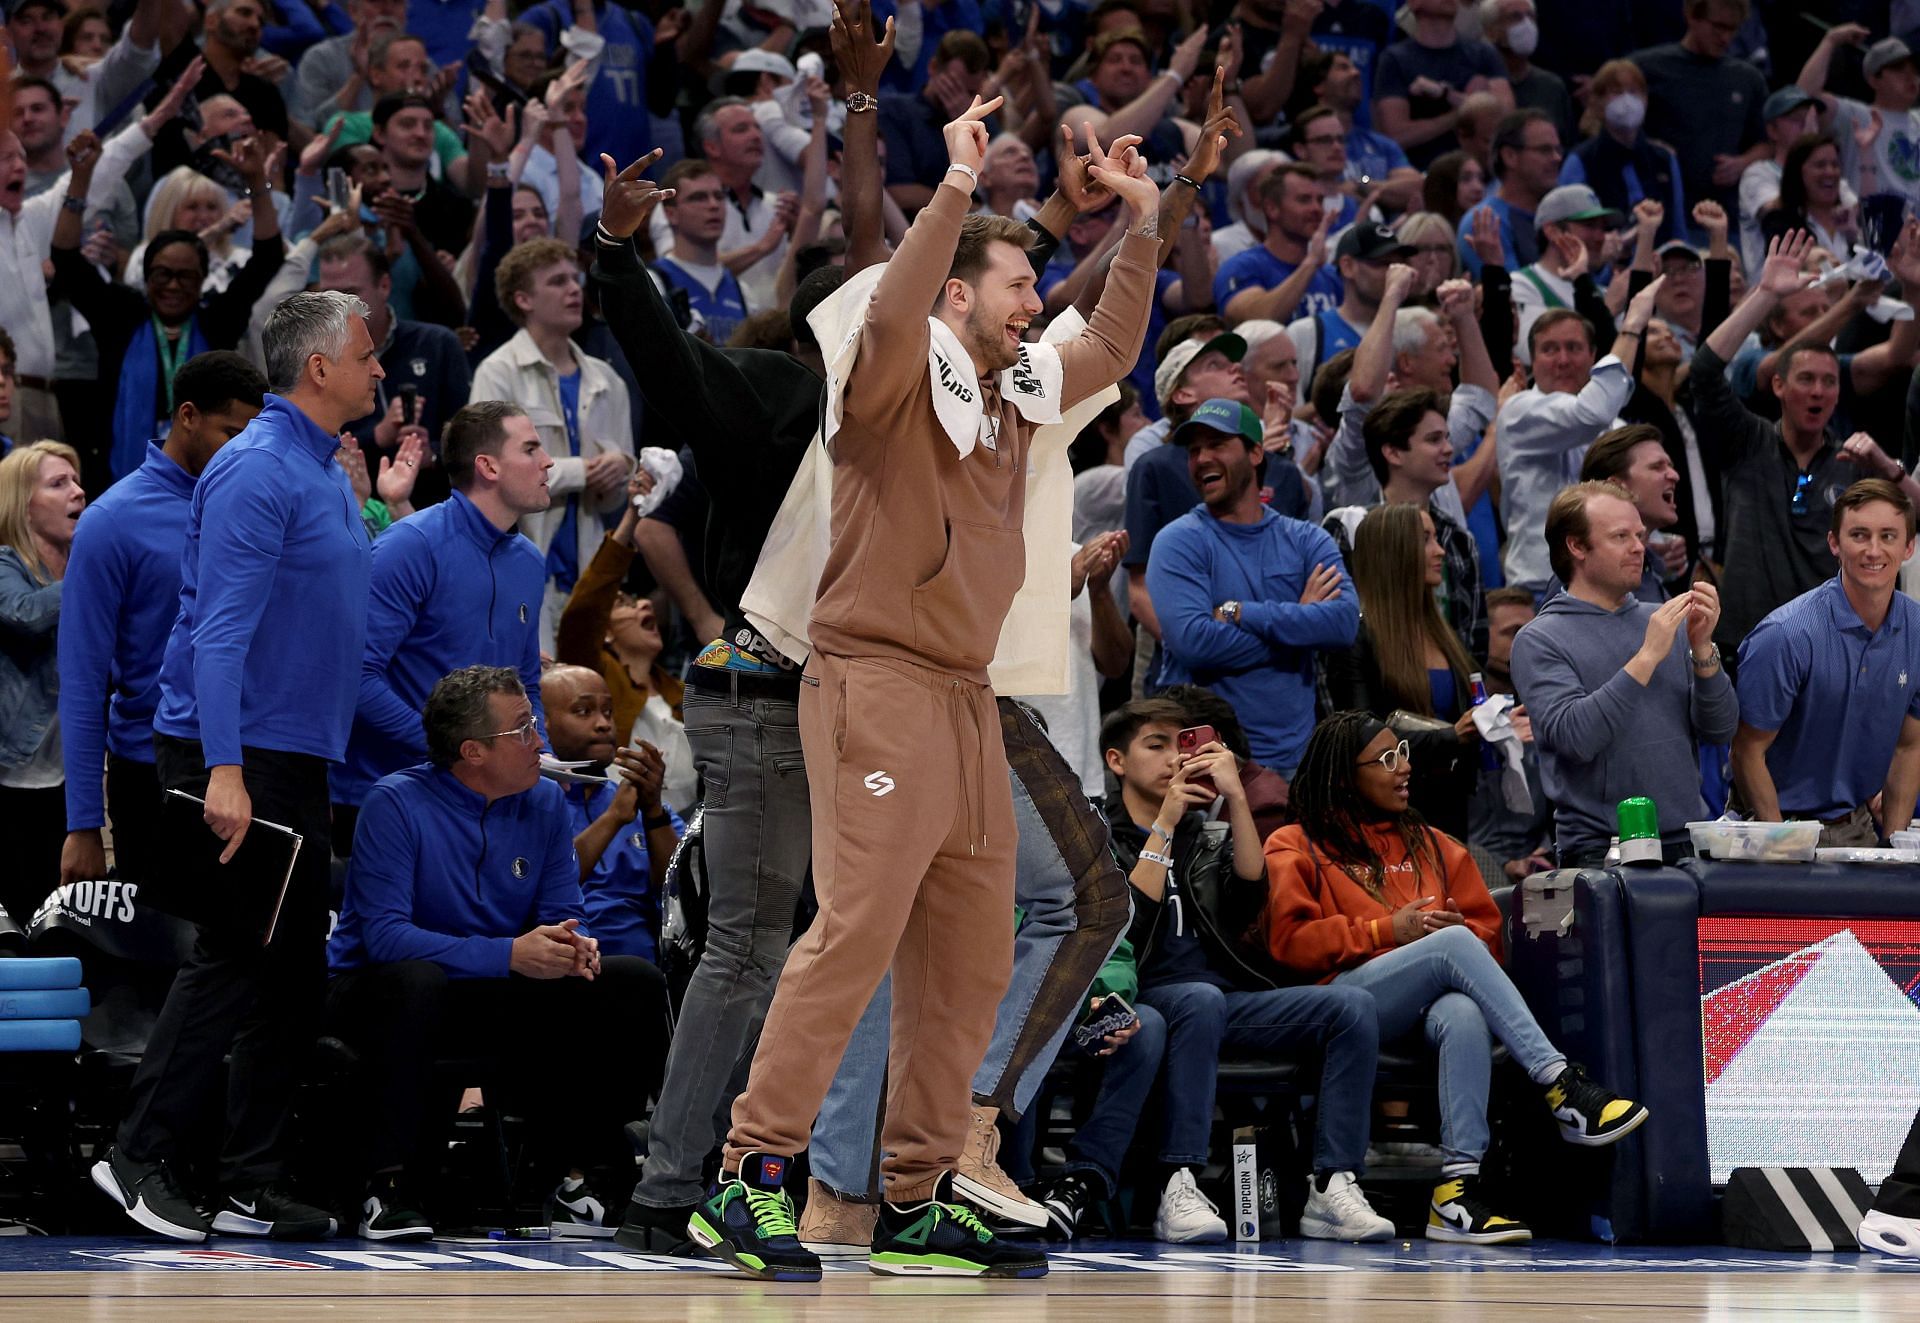 Luka Doncic has been listed as questionable by the Mavericks to face the Jazz in Game 4